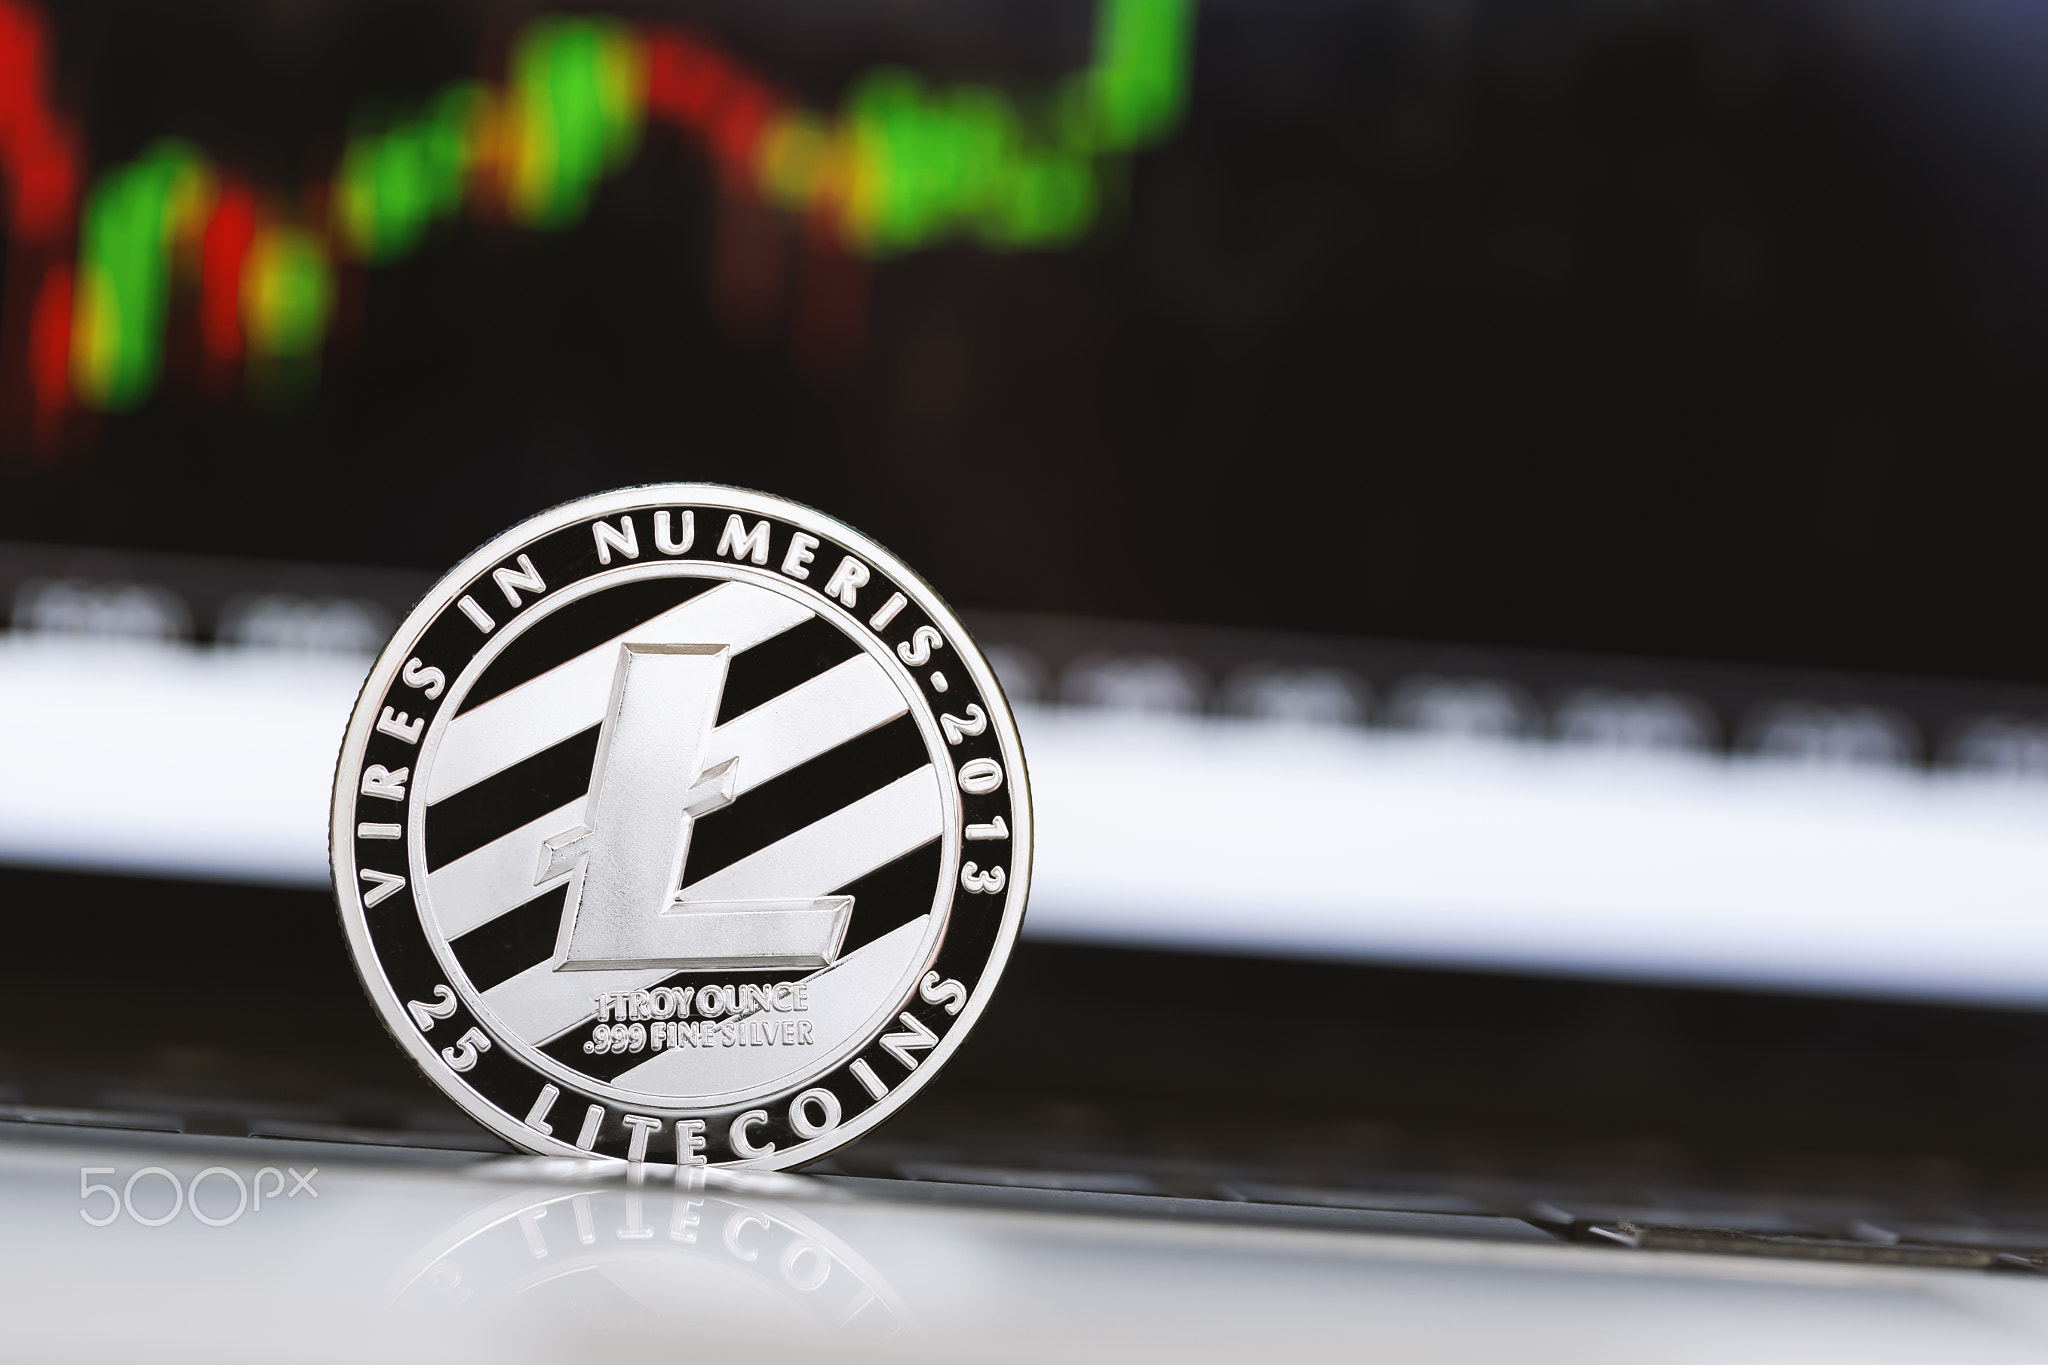 Litecoin crypotocurrency coin